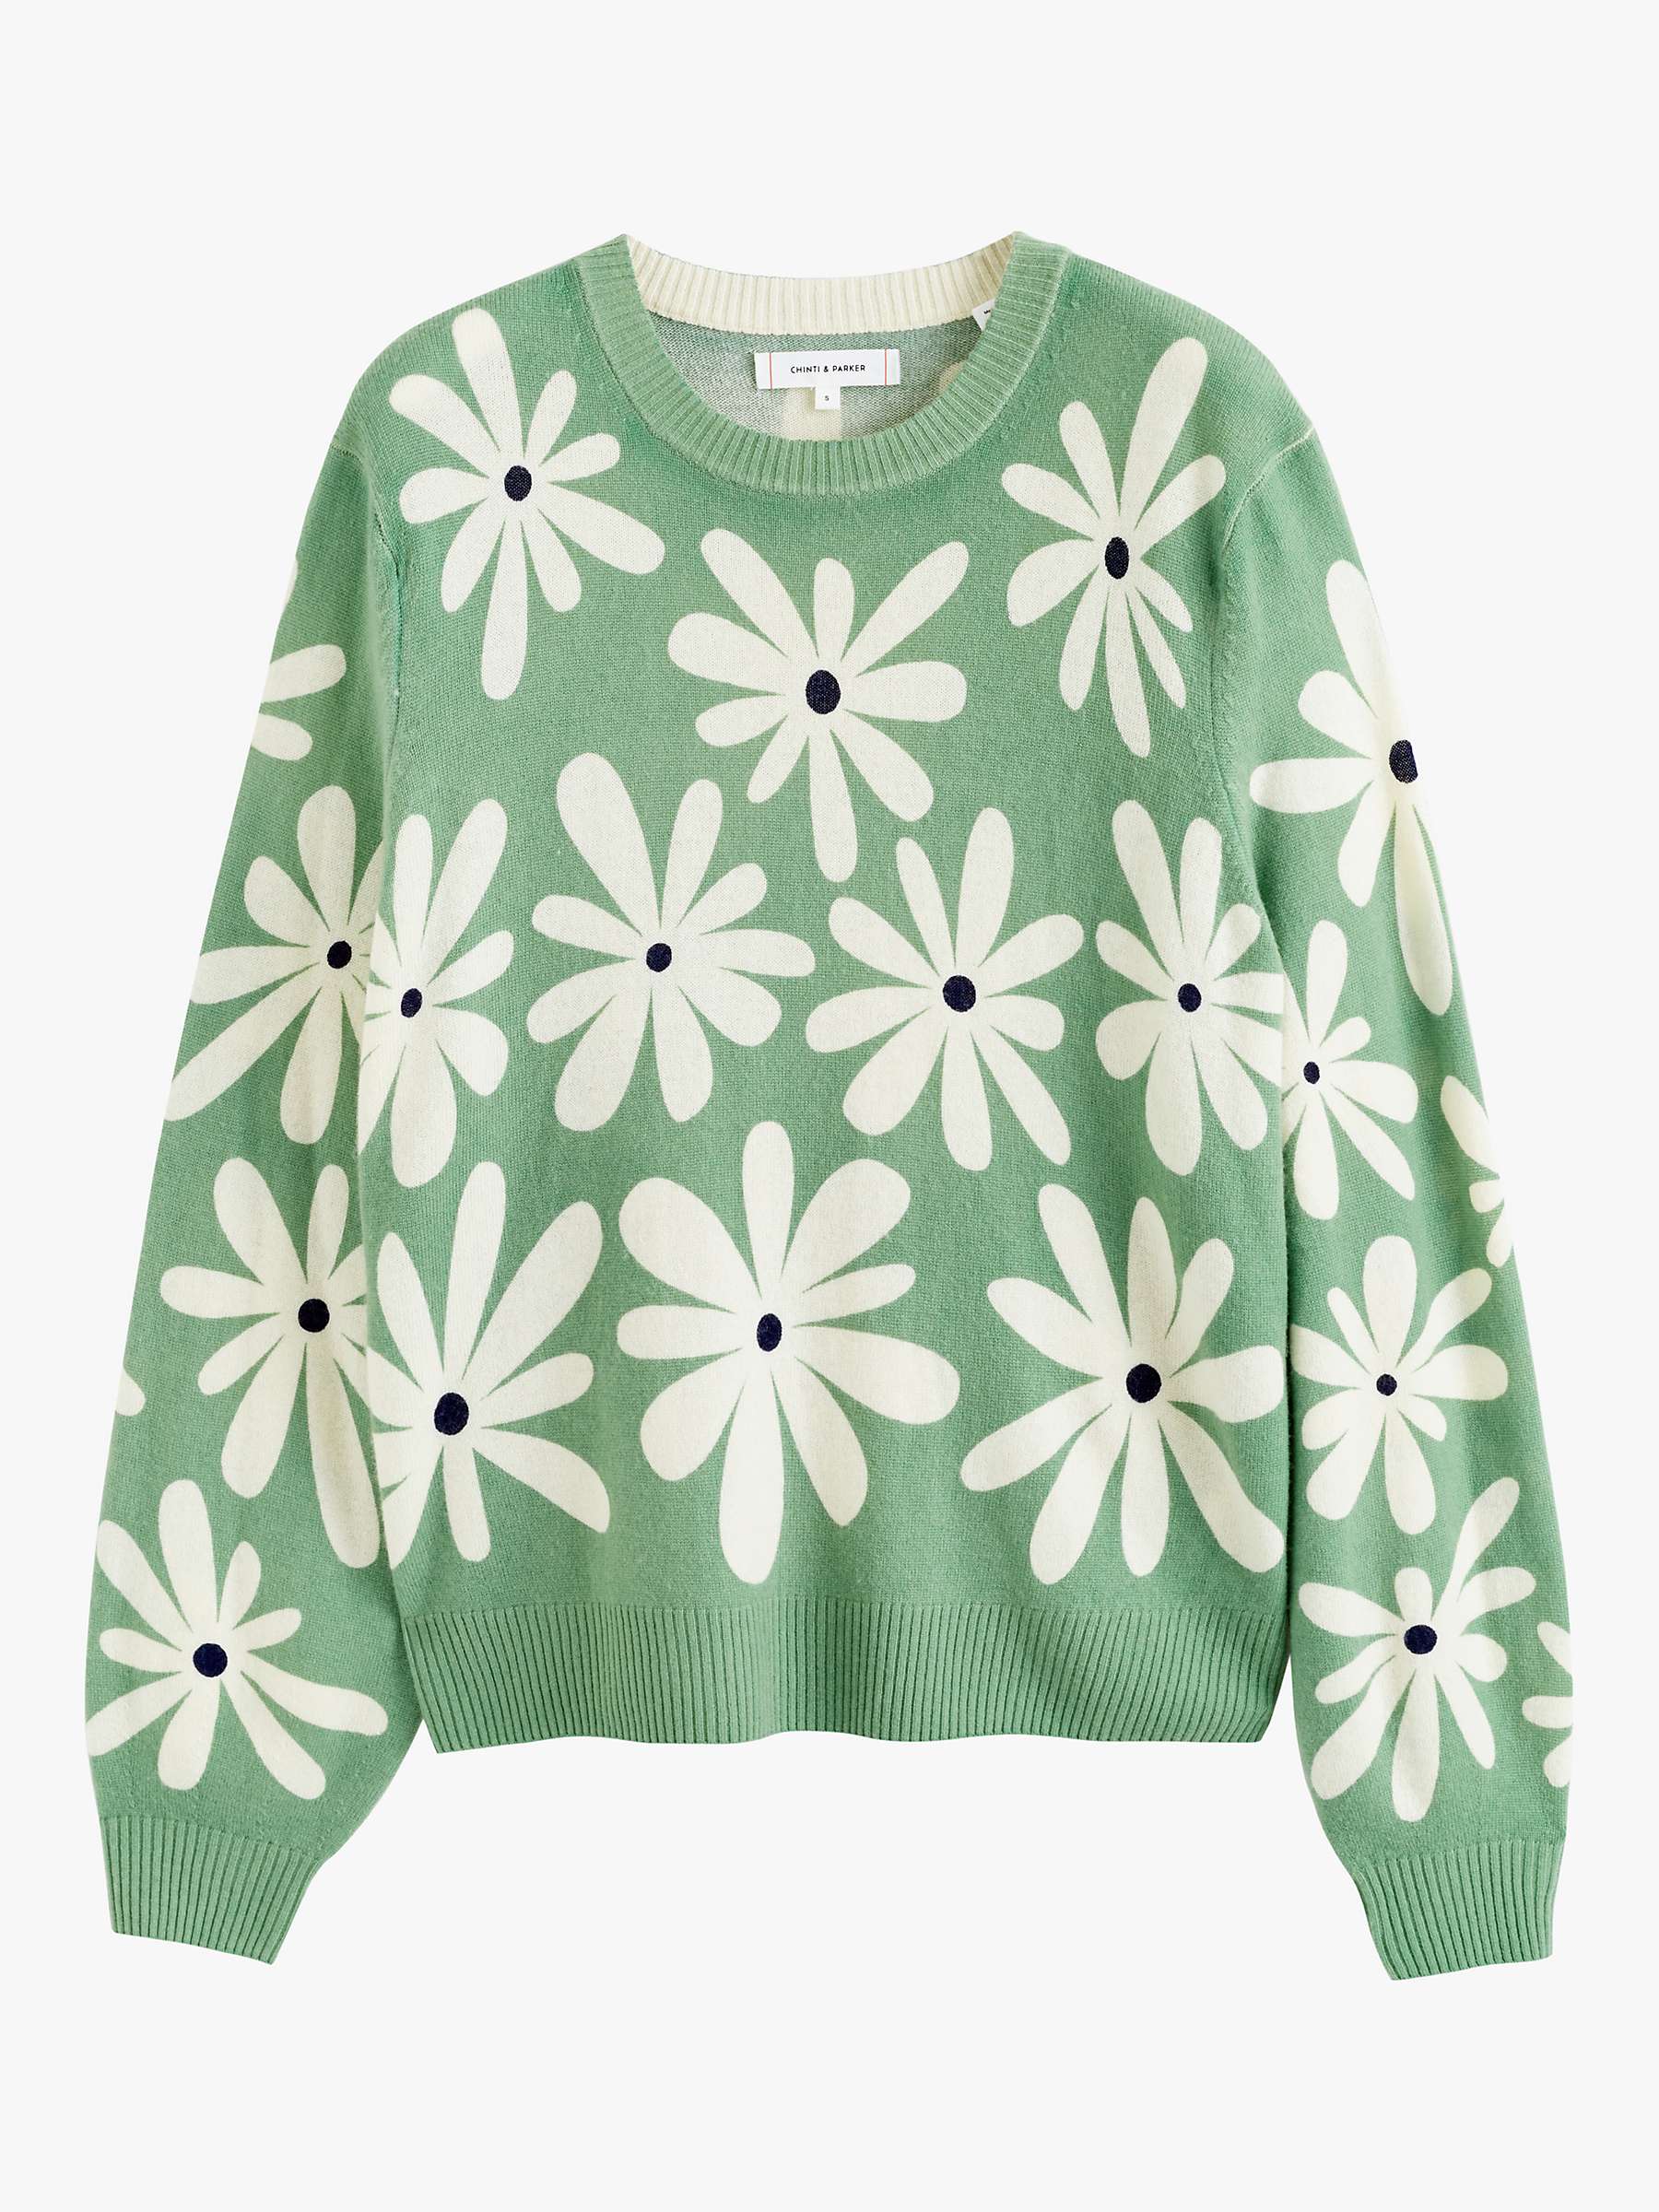 Buy Chinti & Parker Cashmere Blend Daisy Jumper Online at johnlewis.com